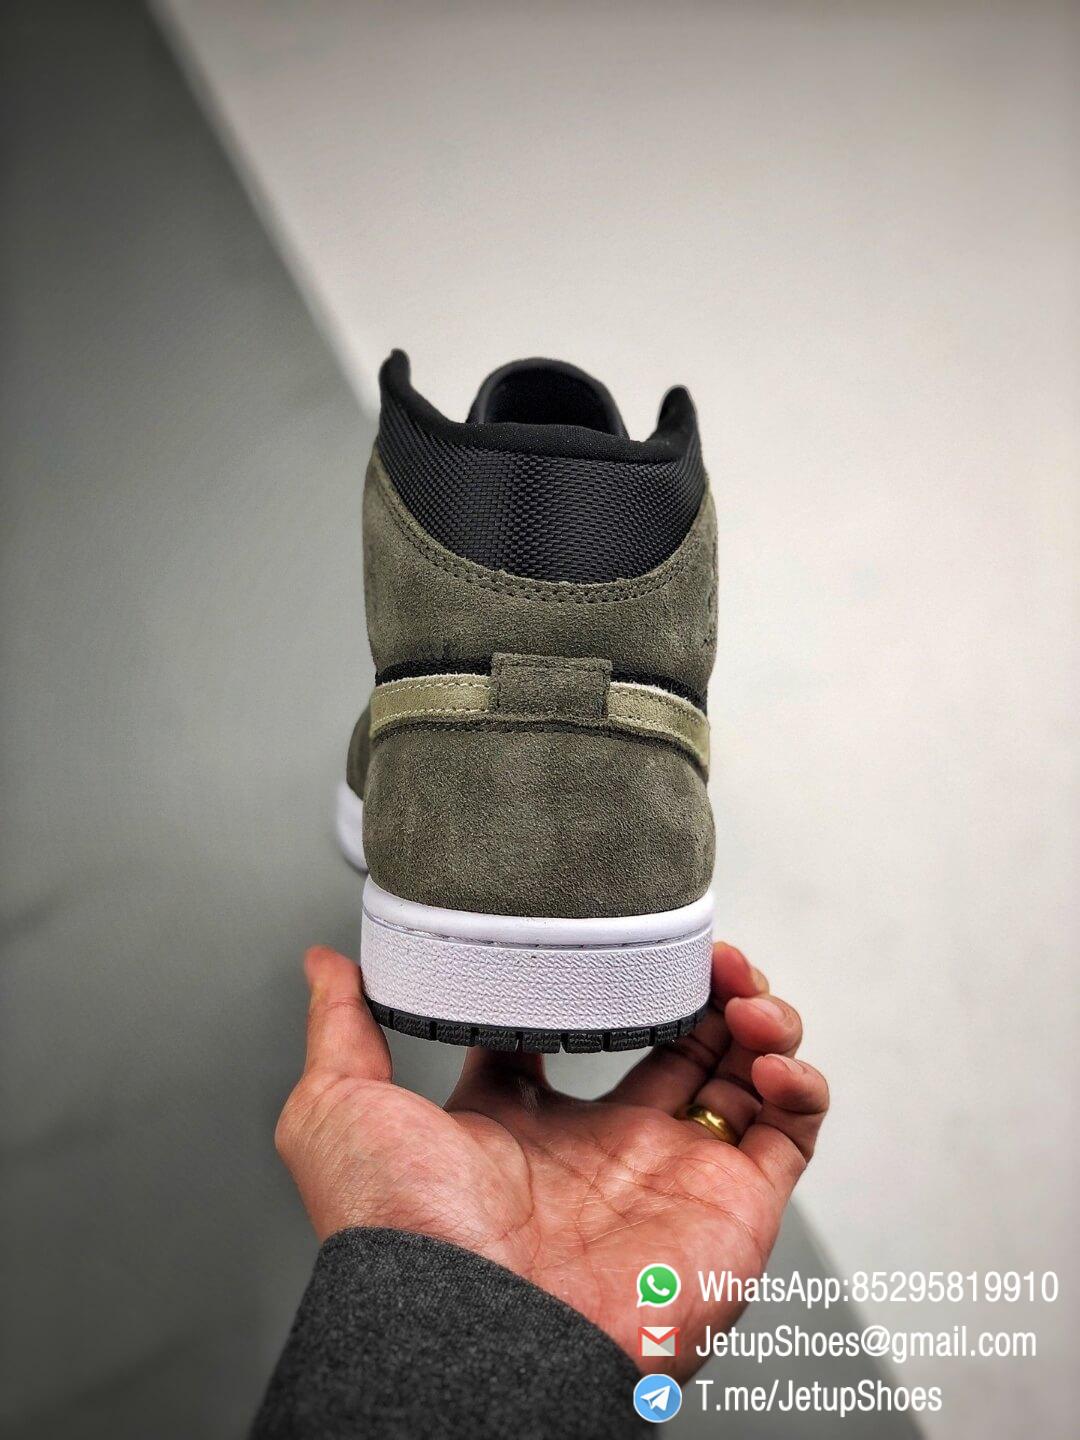 The Nike Wmns Air Jordan 1 Mid Olive Black Mesh Underlay Olive Tan Suede Overlay Repshoes 07